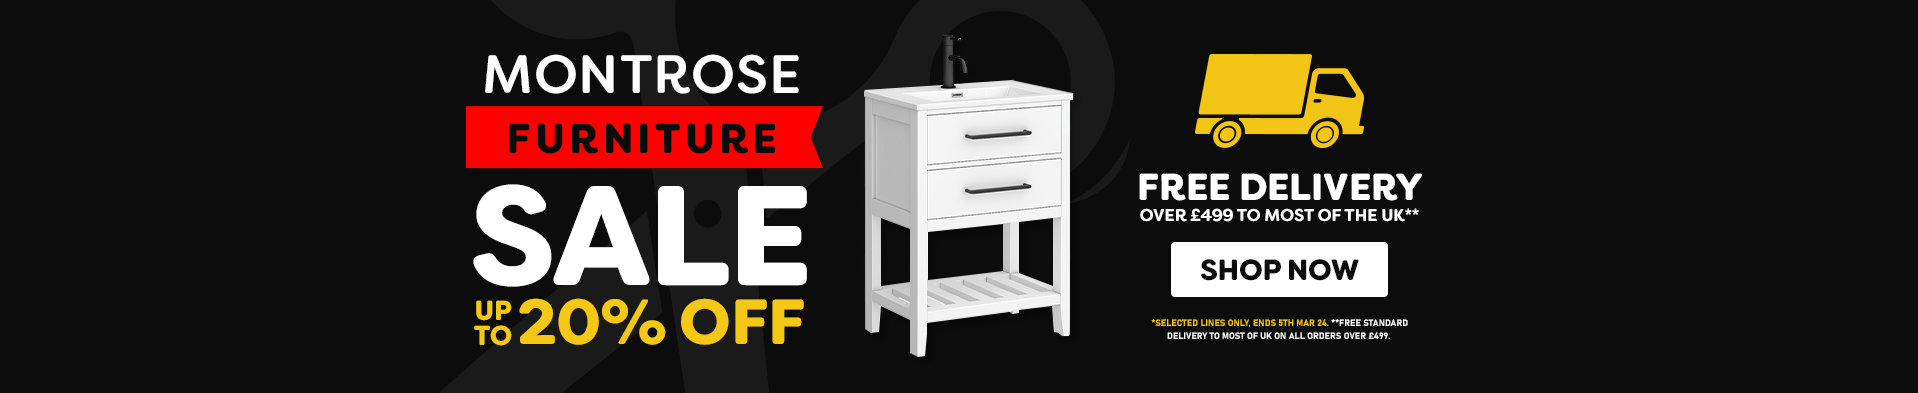 Price Cut Event - Montrose Furniture - Free Delivery